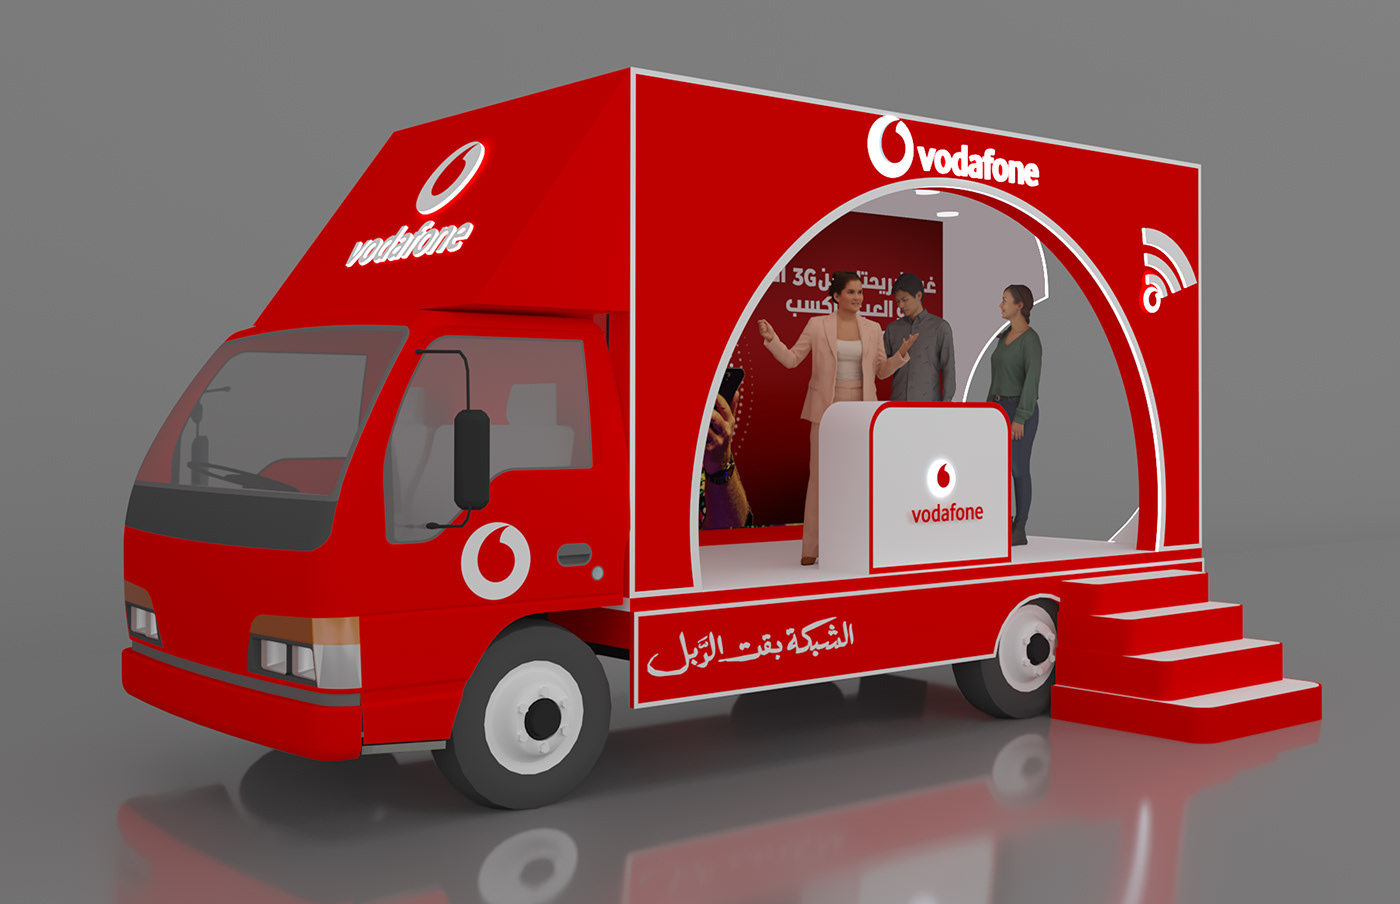 vodafone Roadshow Event brand identity Stand Exhibition  booth 3D Render vray